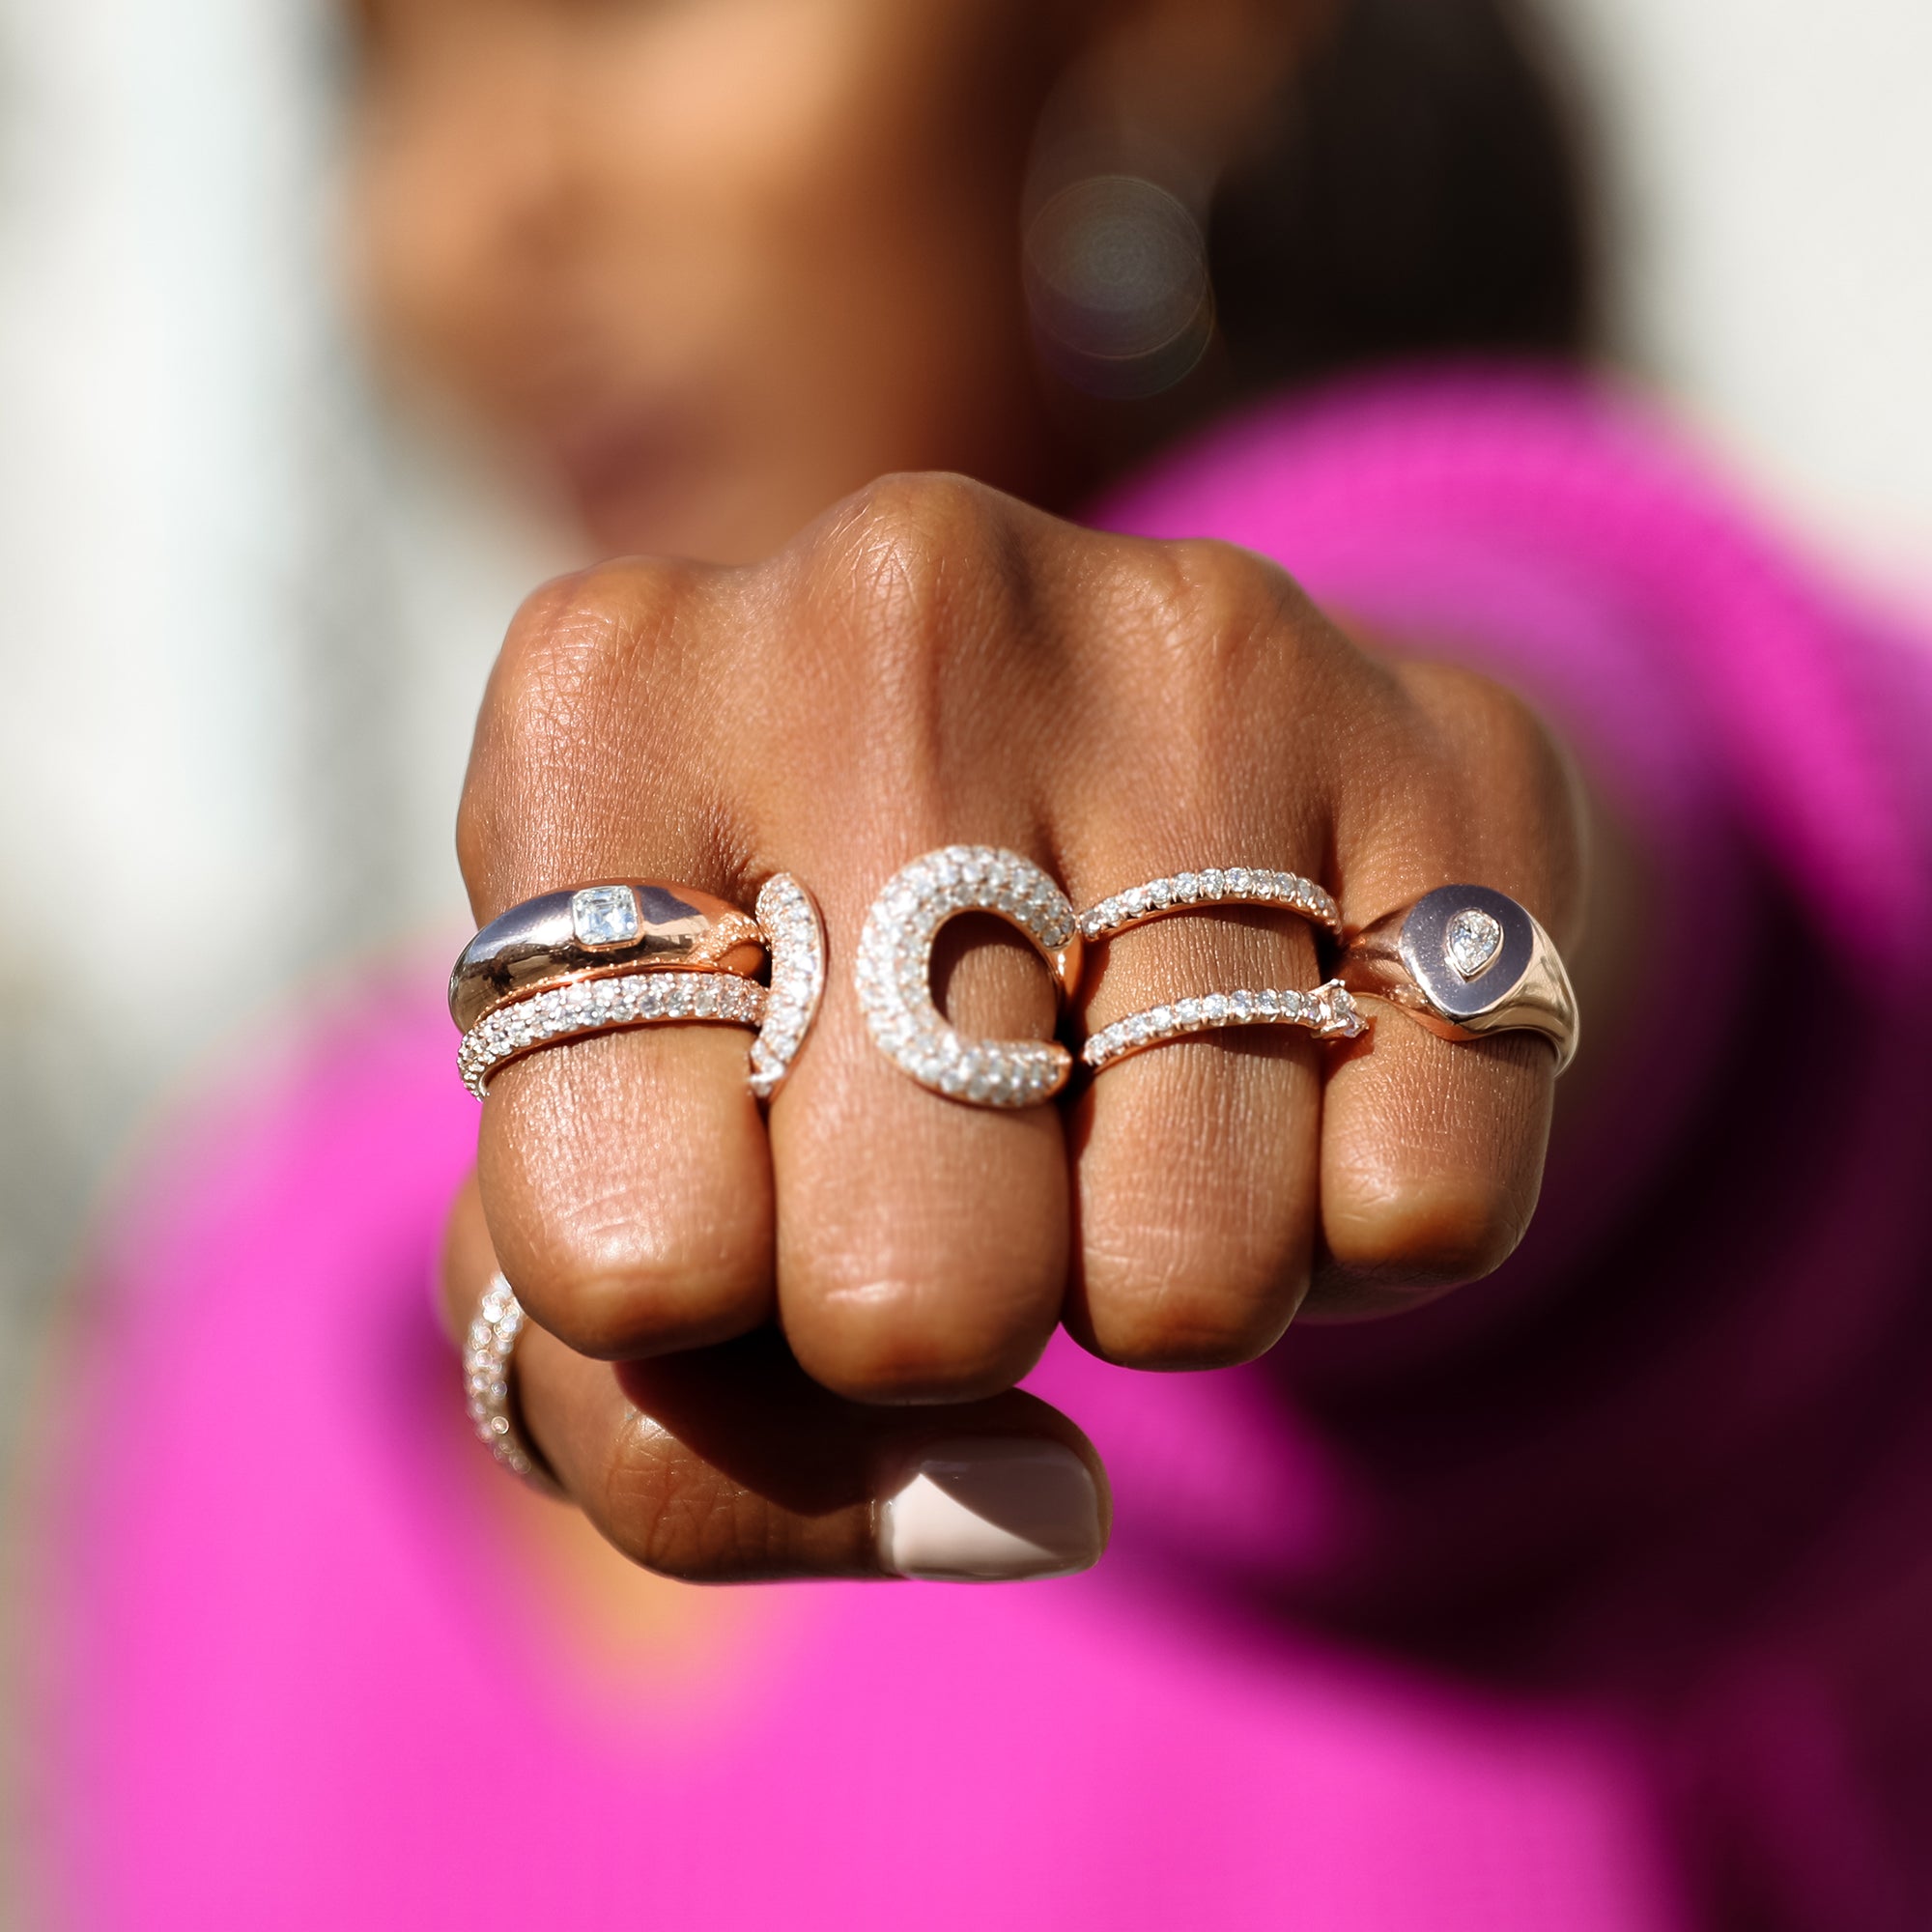 The Asscher Dome Band shown stacked on the index finger with Infinity Thumb Ring. All the rings are modeled in rose gold.